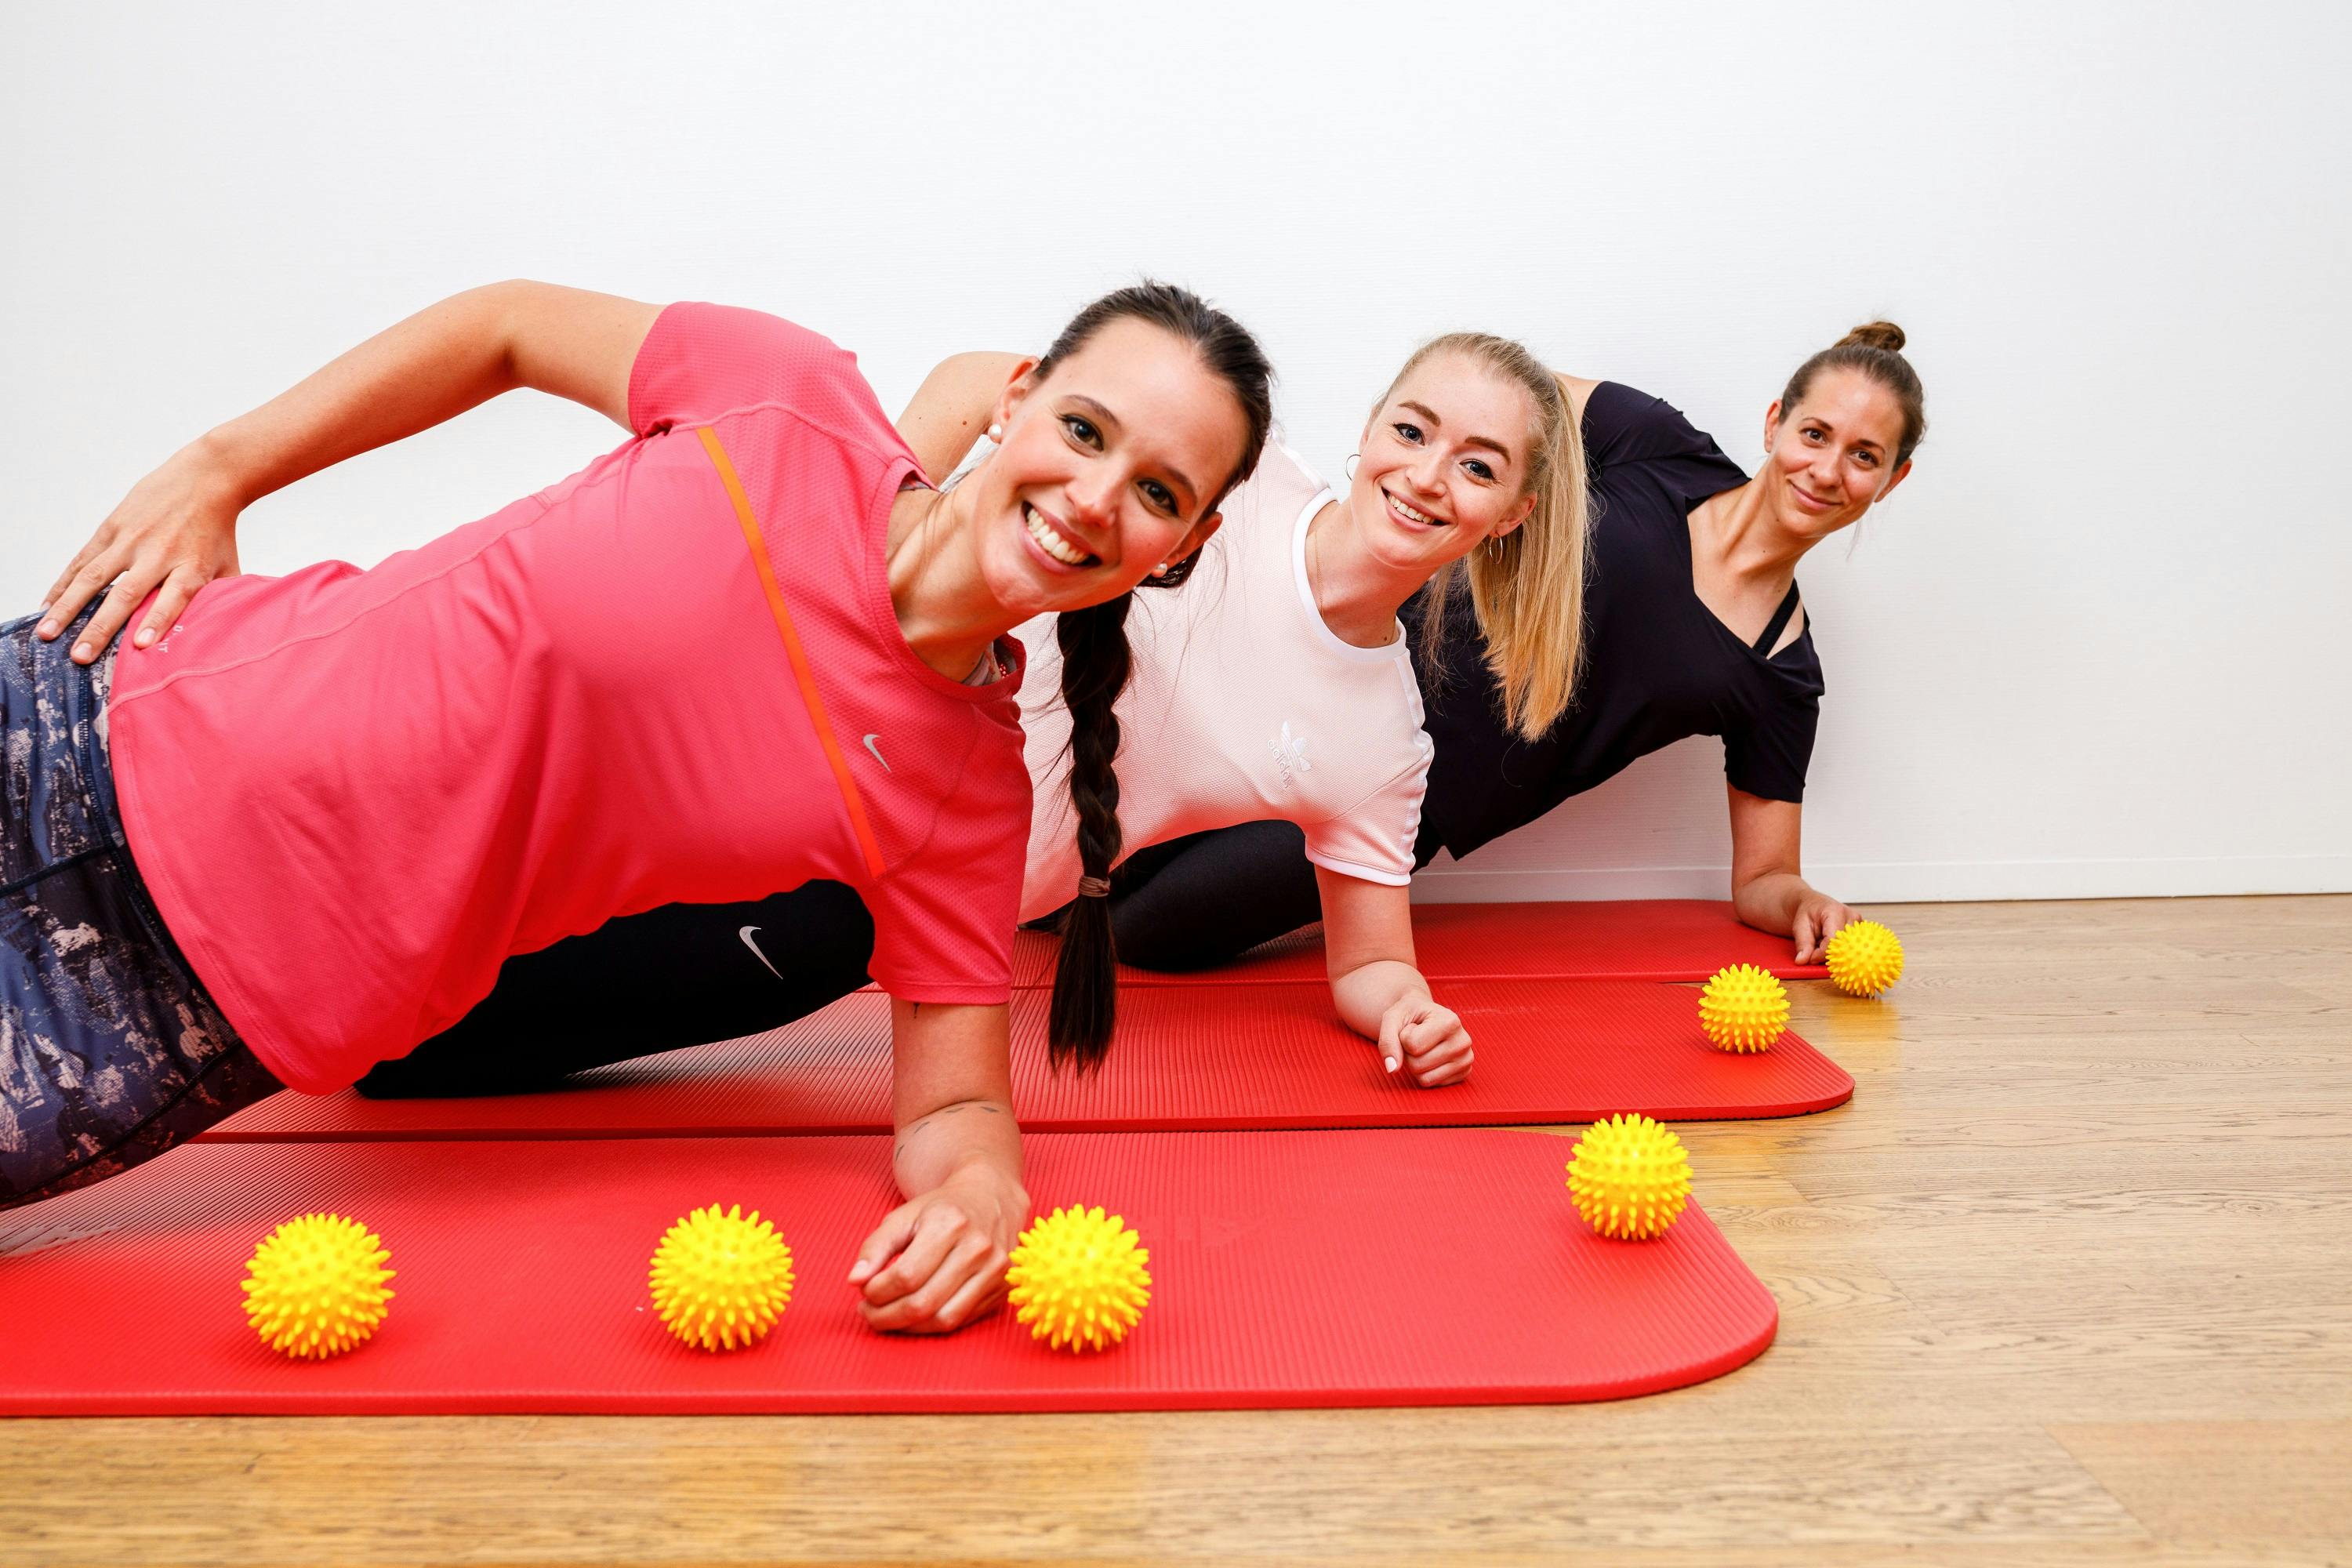 Three smiling women do plank exercises on red fitness mats with yellow massage balls.